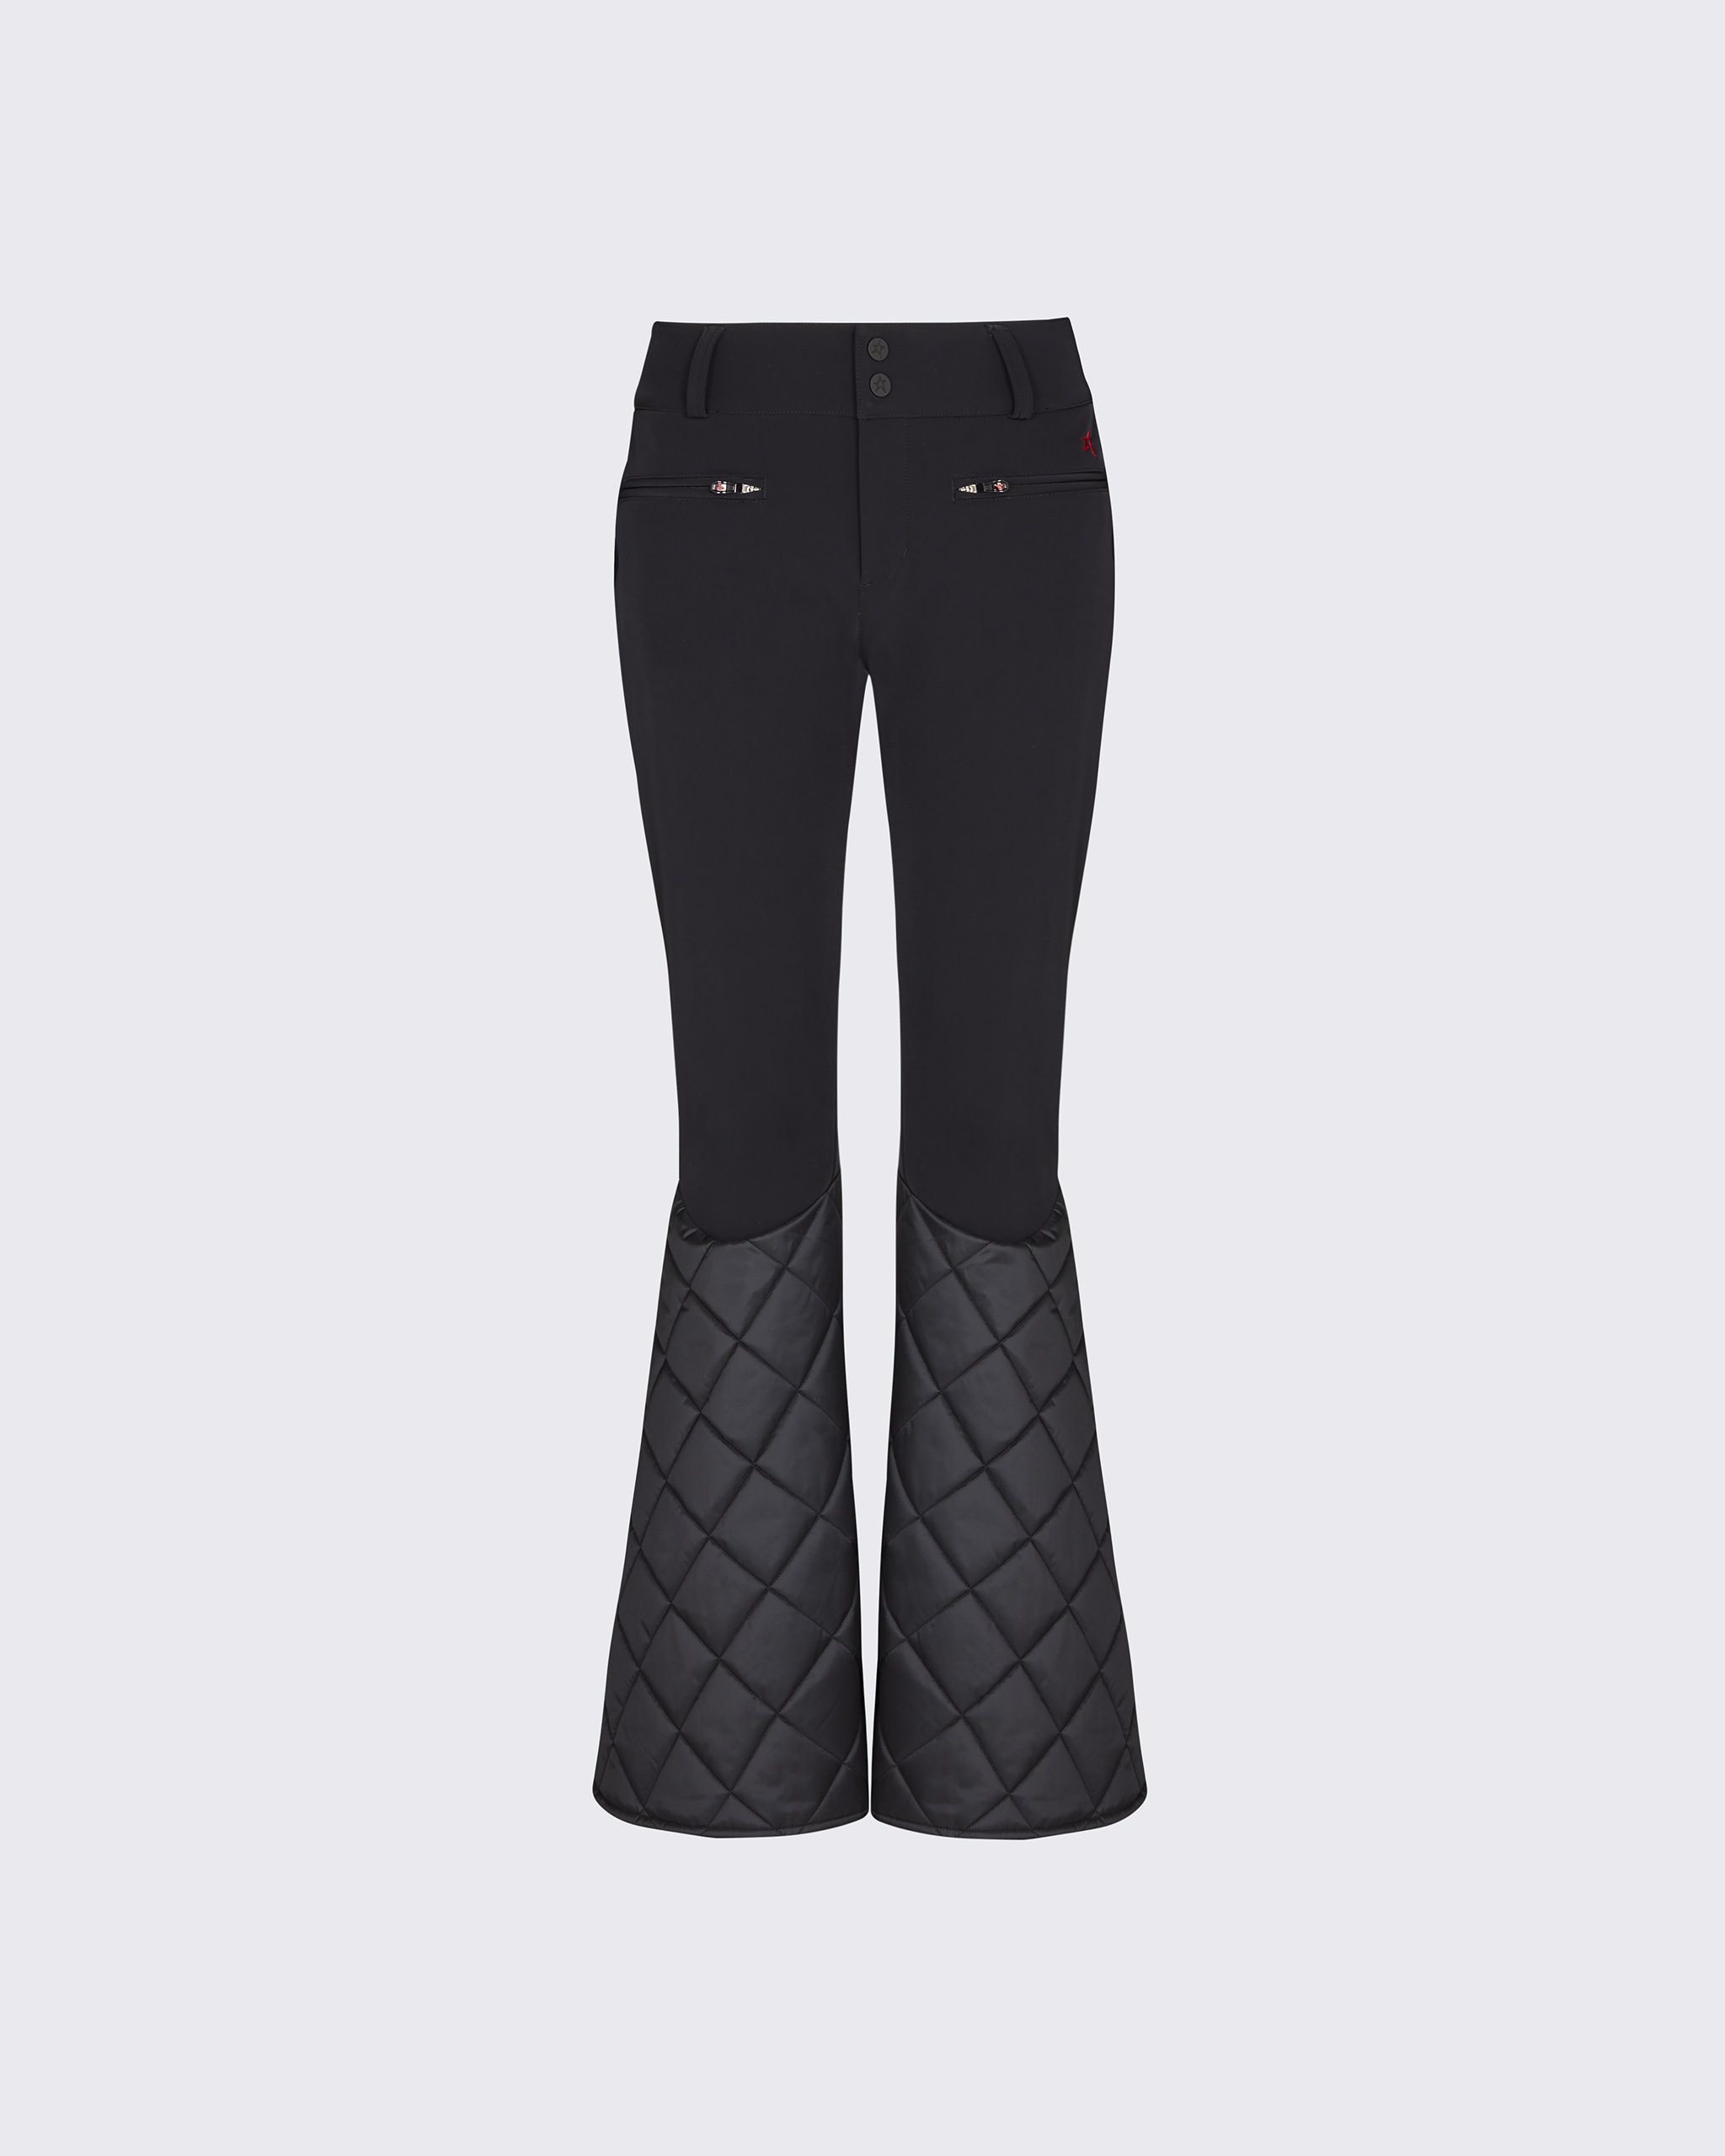 Pants, 350£ at perfectmoment.com - Wheretoget  Apres ski outfits, Skiing  outfit, White ski outfit